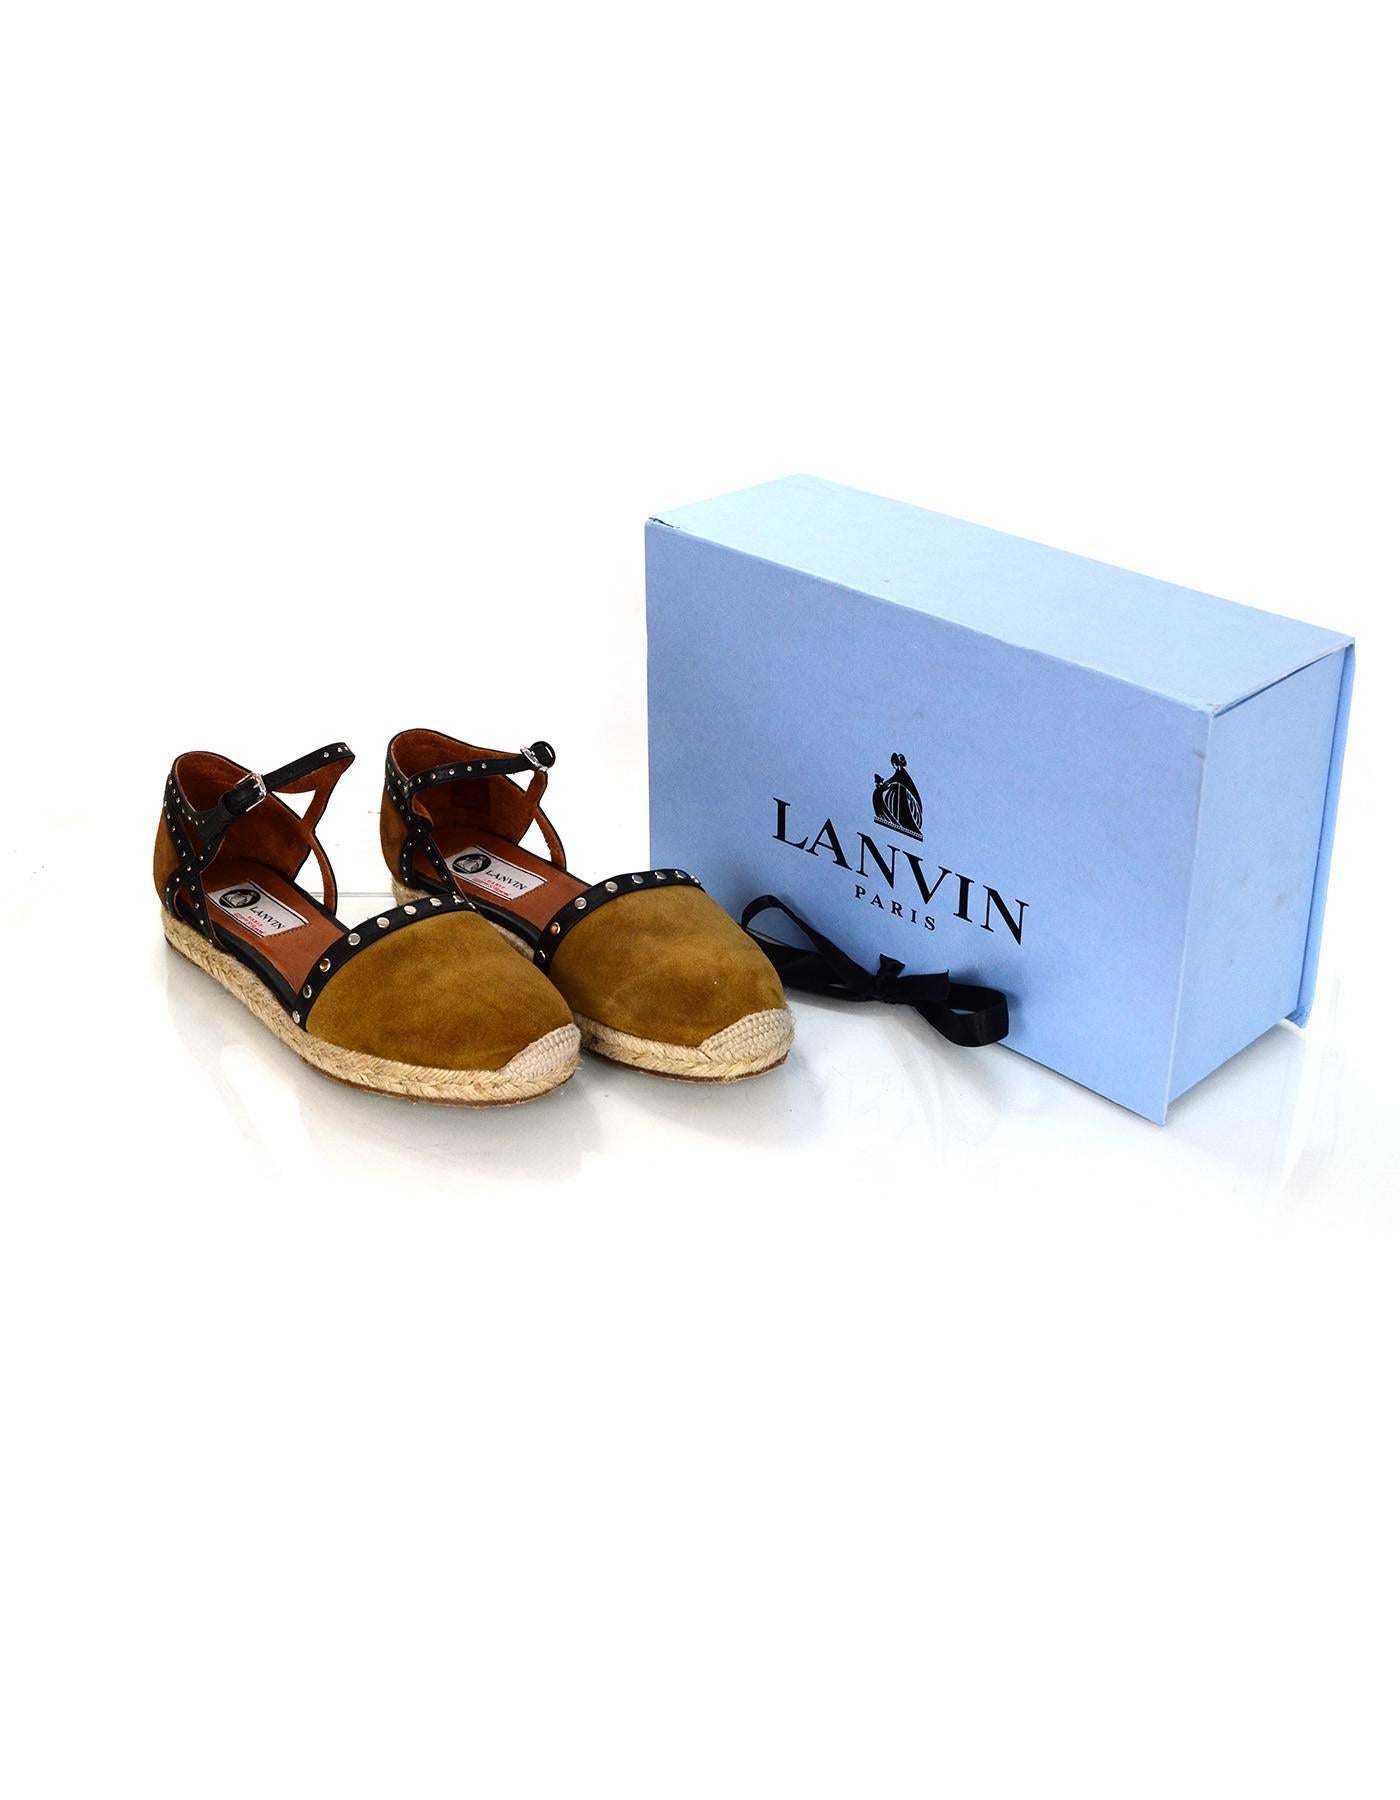 Lanvin Suede & Leather Studded Espadrilles sz 37 w/BOX In Excellent Condition In New York, NY